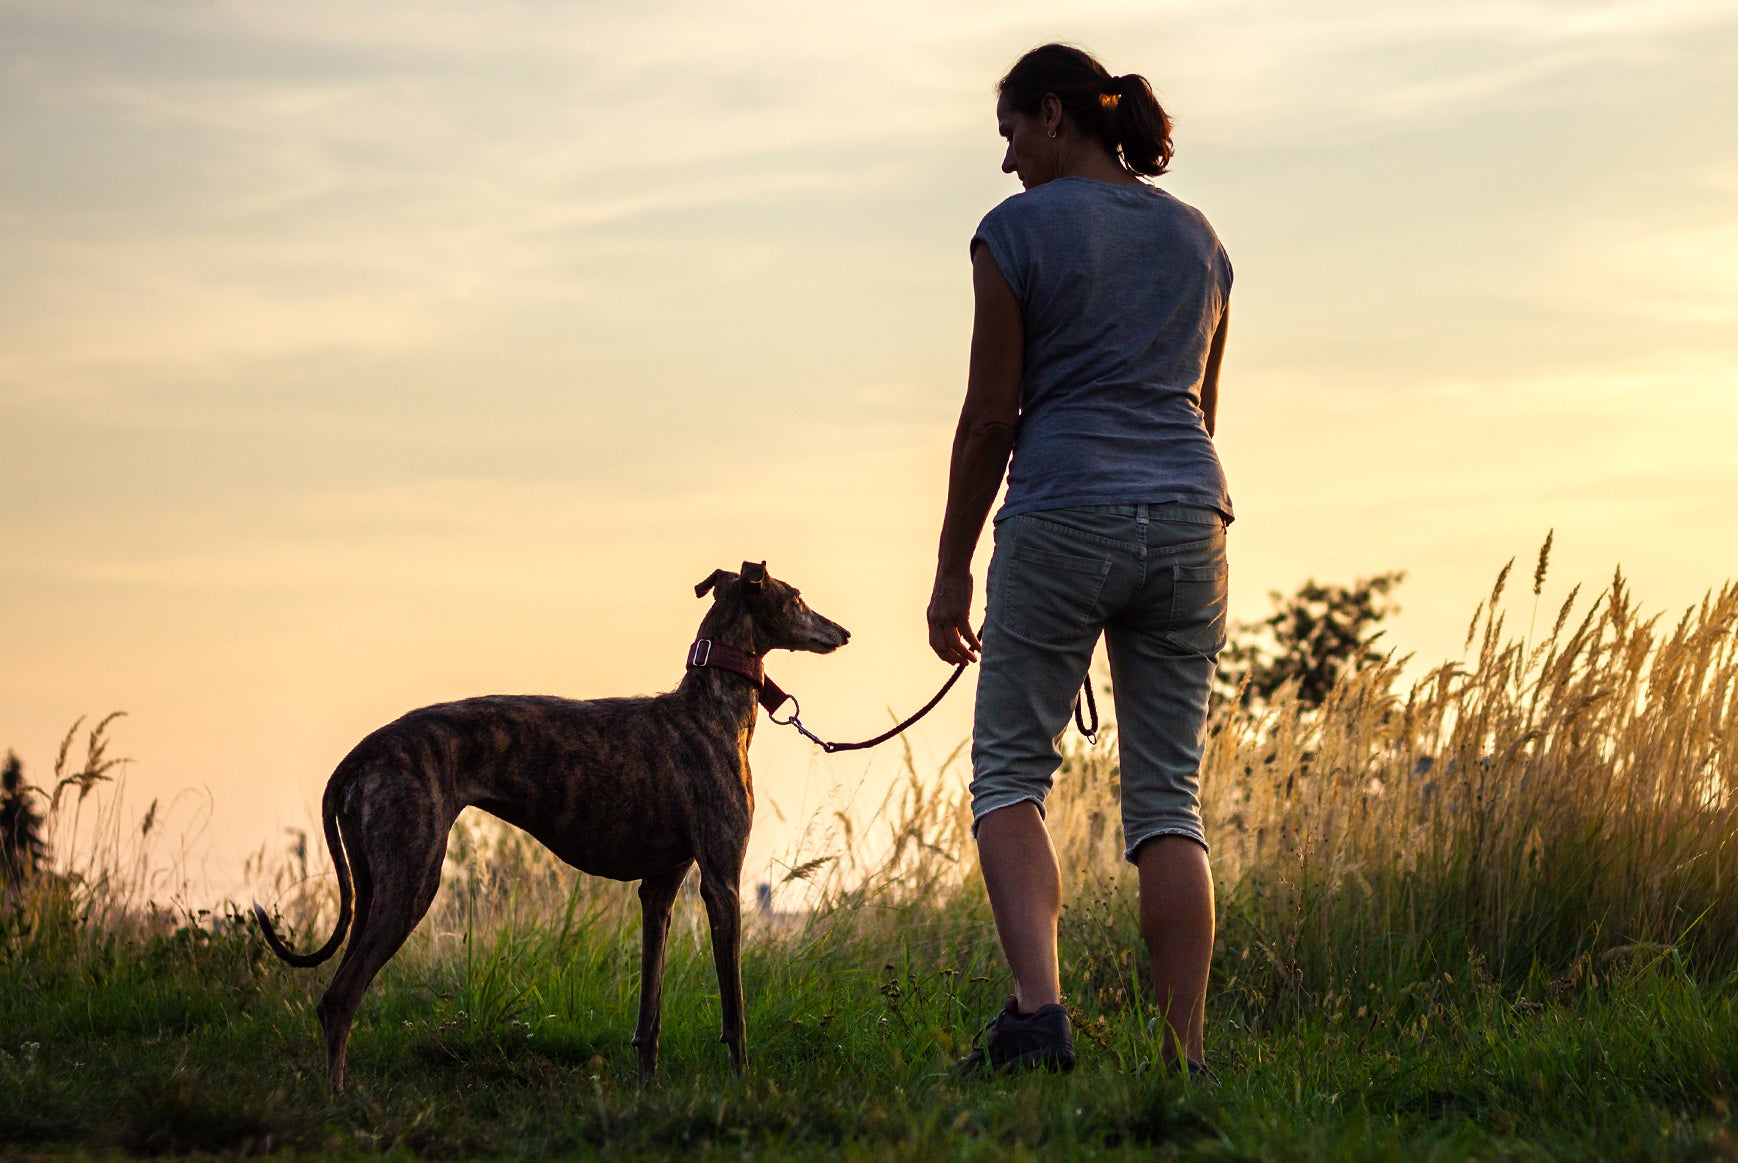 Patches with purpose: Debunking Greyhound Adoption Myths and Celebrating Foster Care